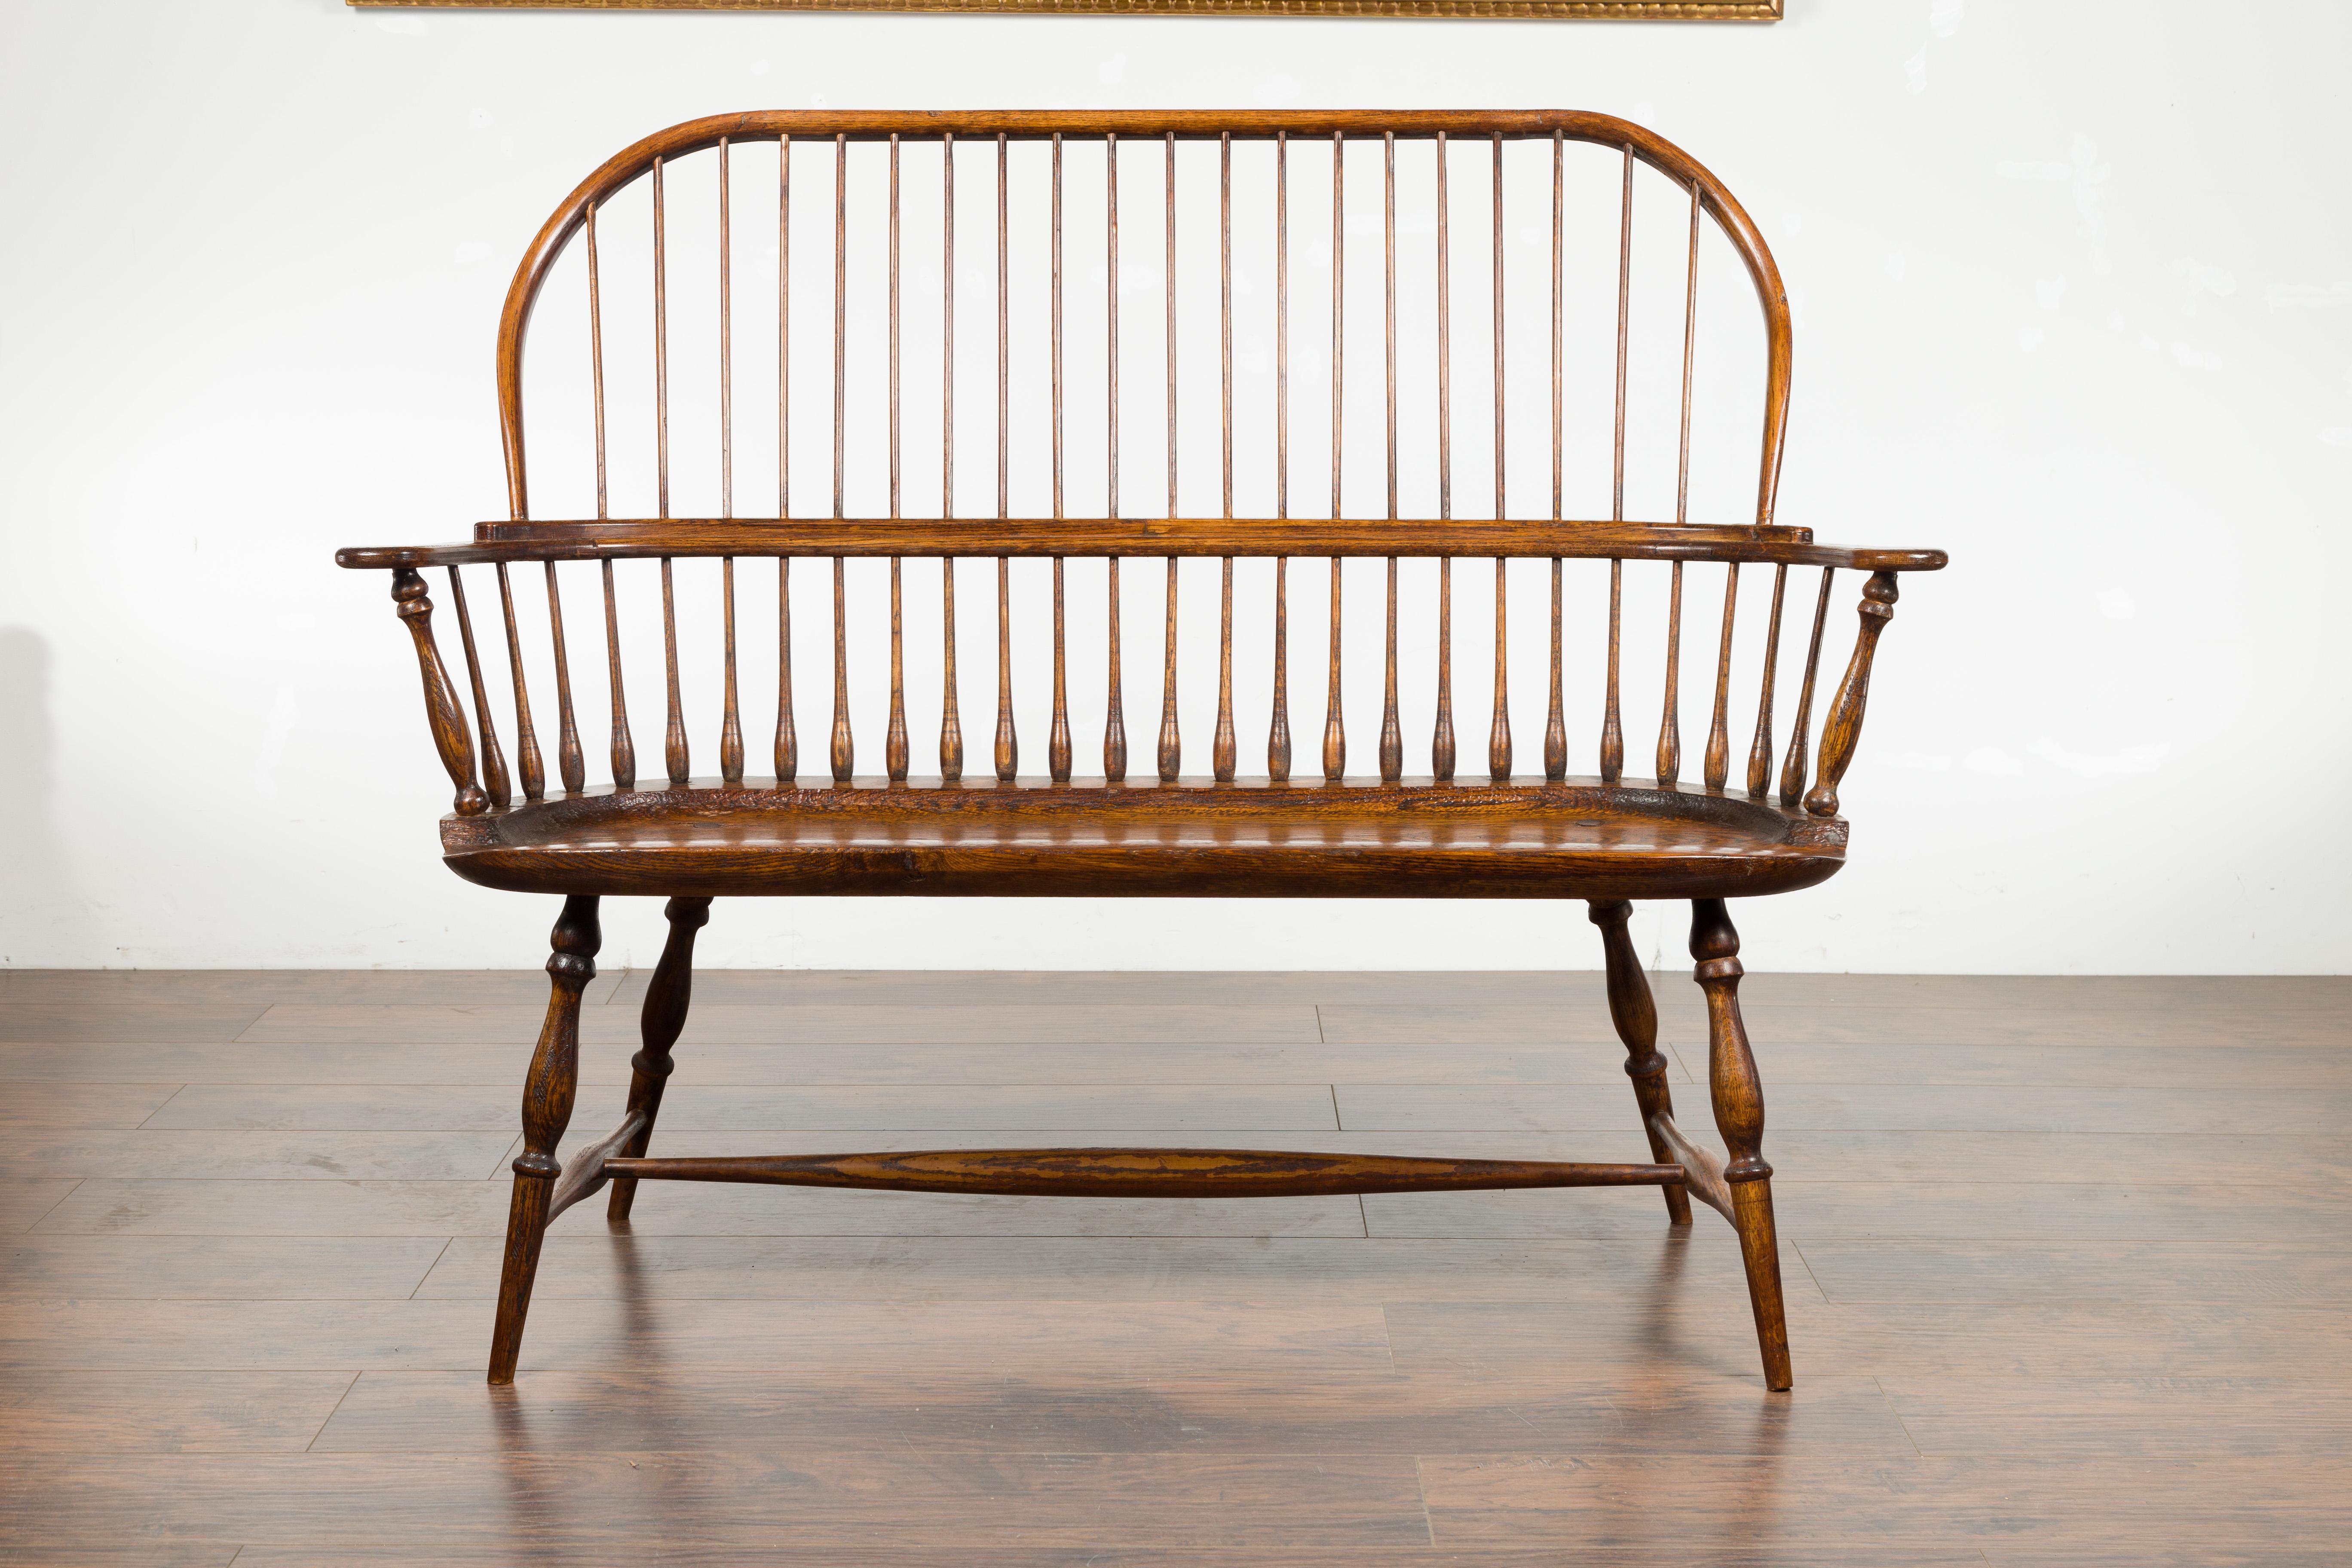 English 19th Century Oak Windsor Bench with Spindle Accents and Cross Stretcher 1